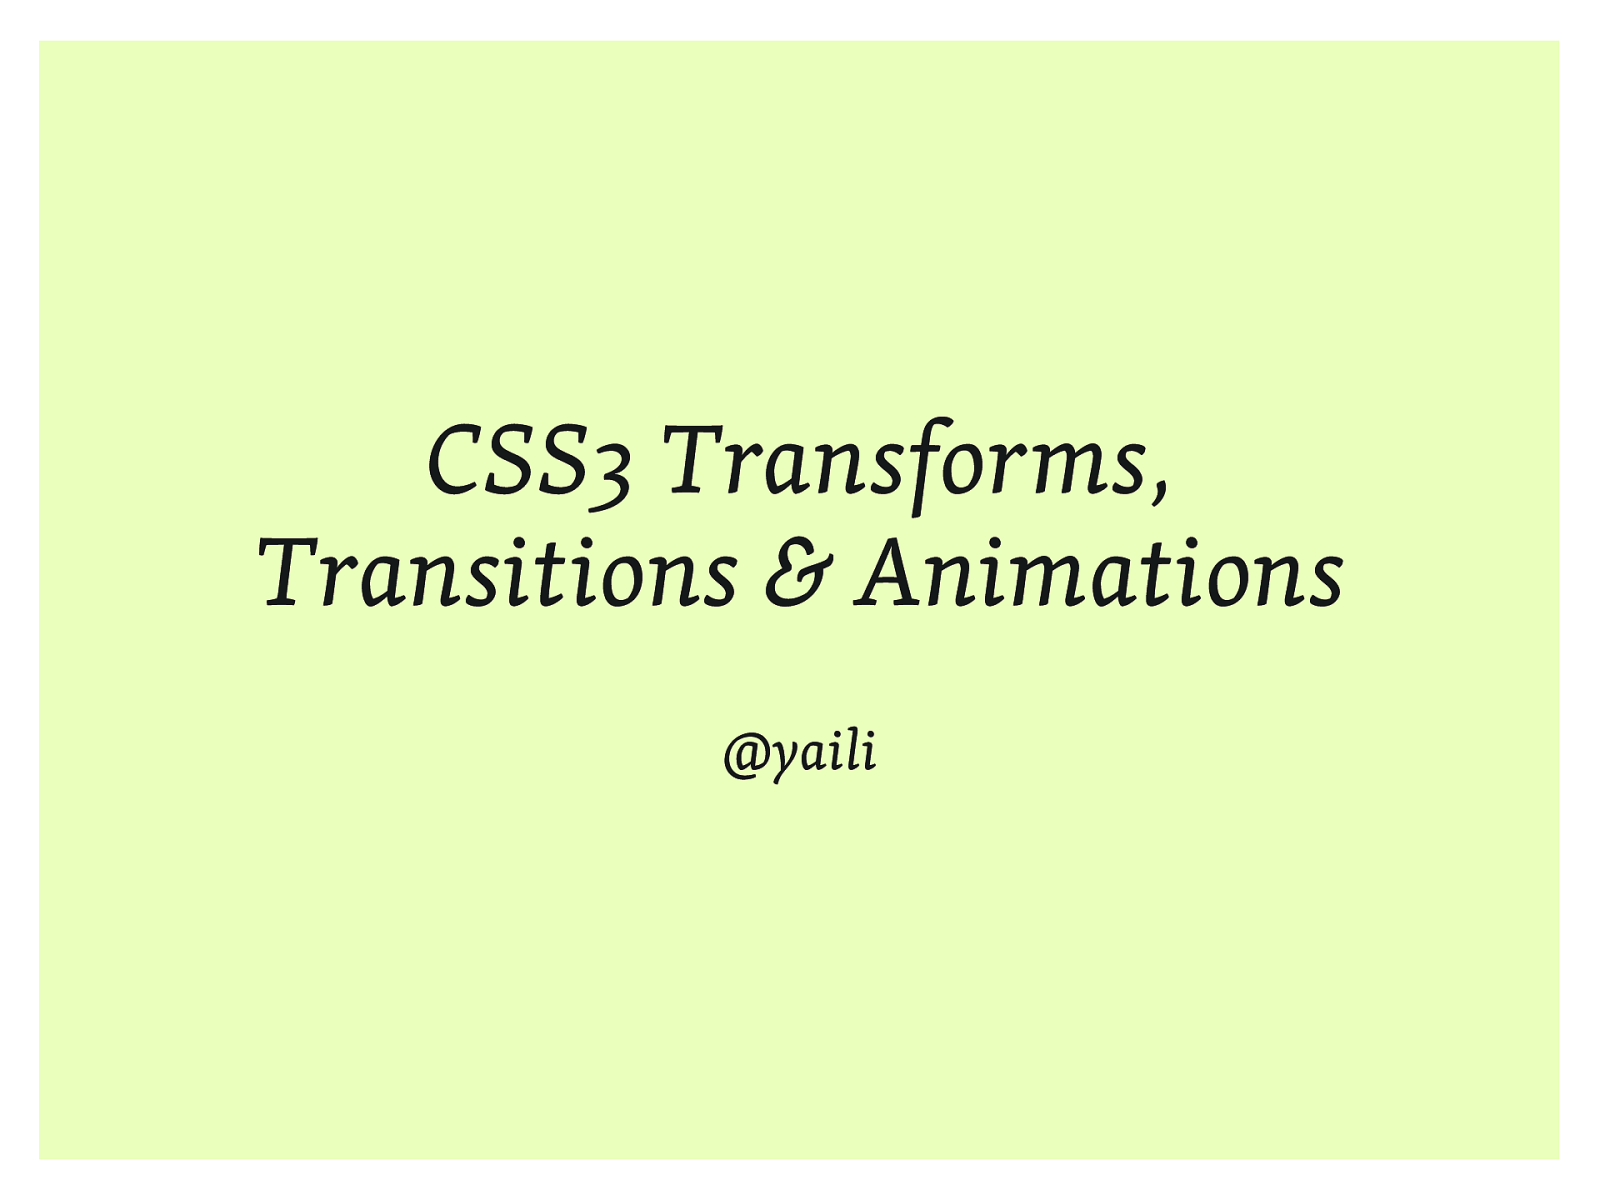 CSS3 Transforms, Transitions & Animations